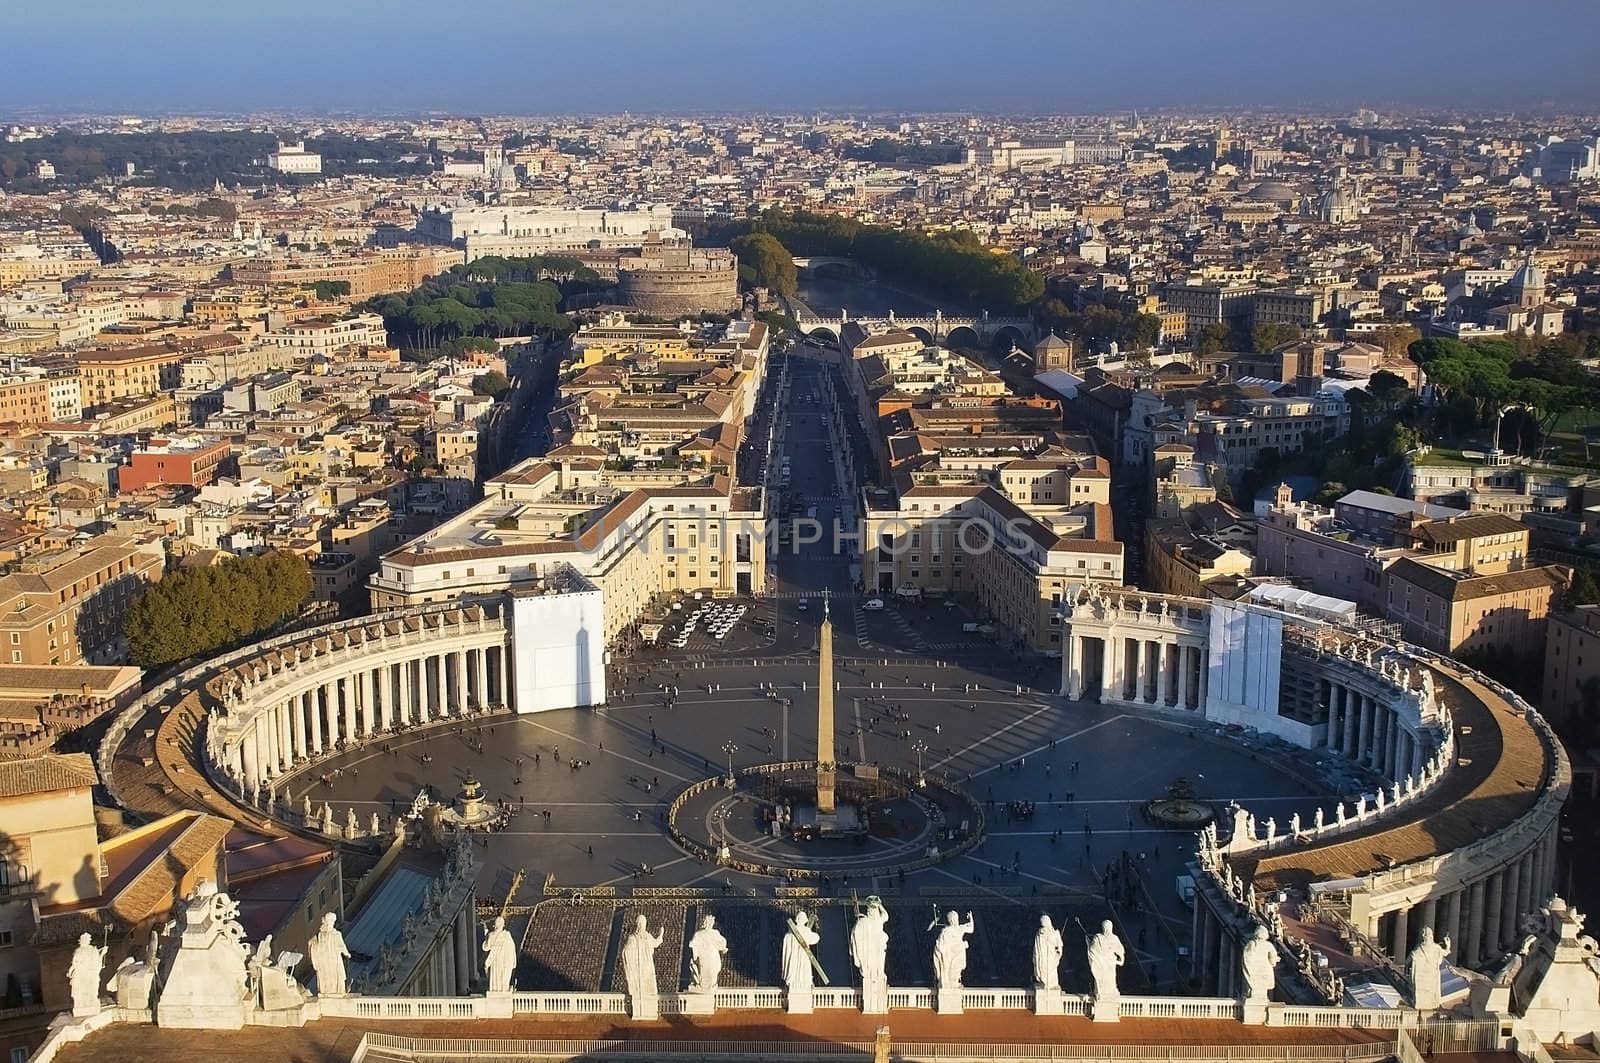 panoramic view of St. Peter's Square in Rome